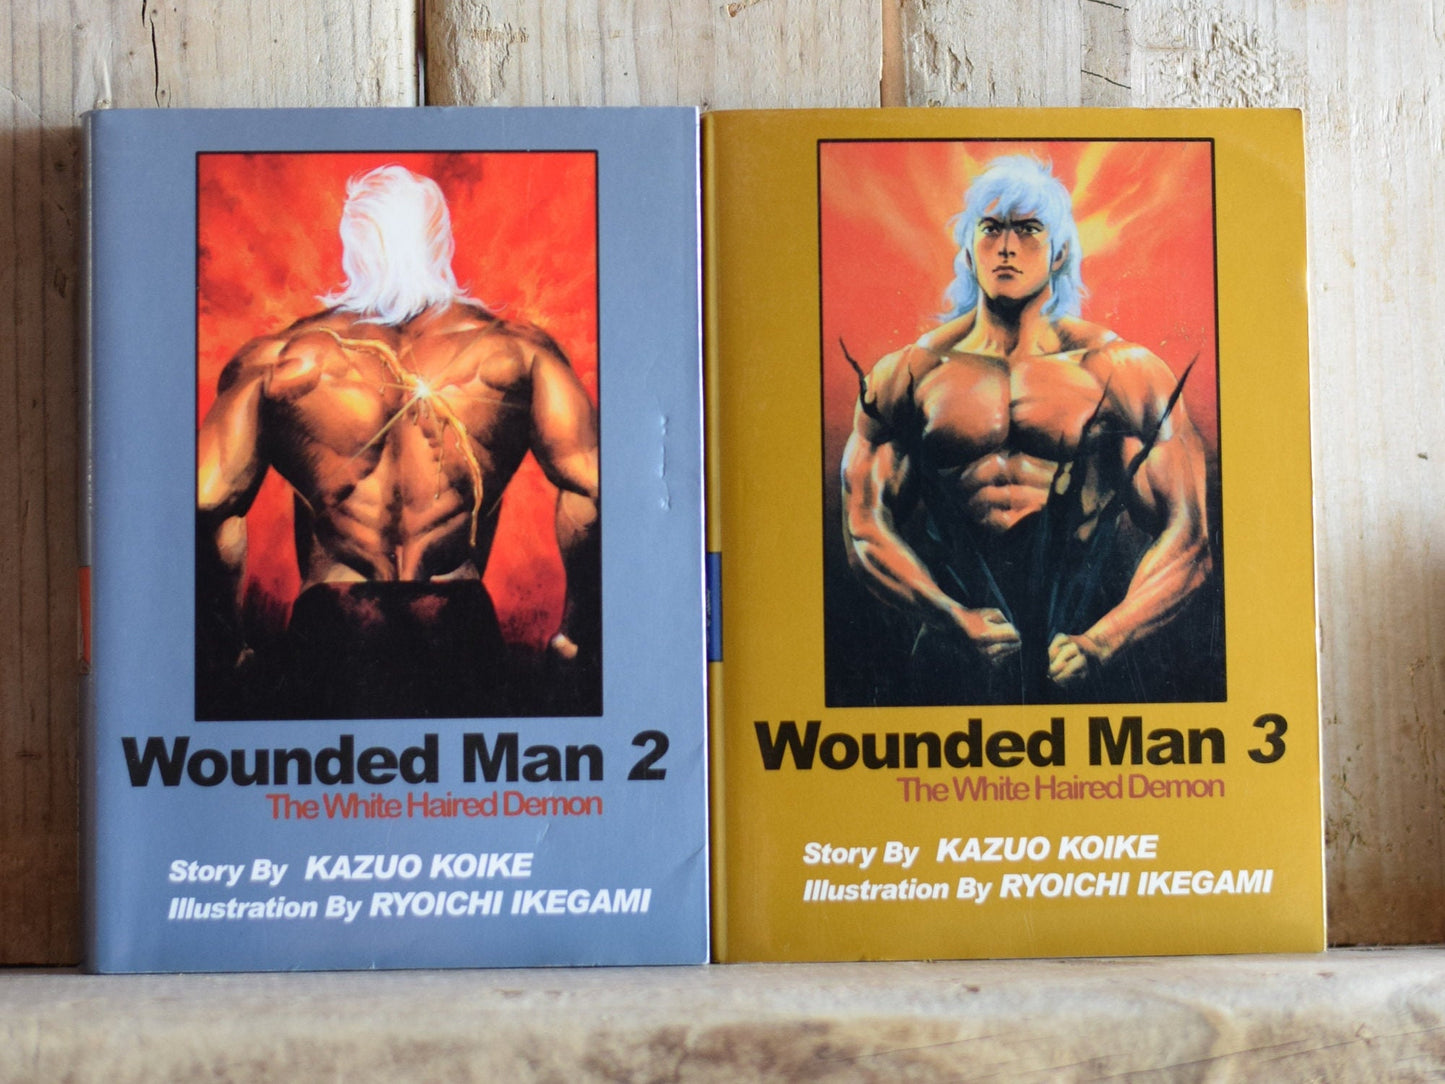 Vintage Graphic Novels: Kazuo Koike and Ryoichi Ikegami - Wounded Man, The White Haired Demon Books 2 and 3 FIRST EDITIONS